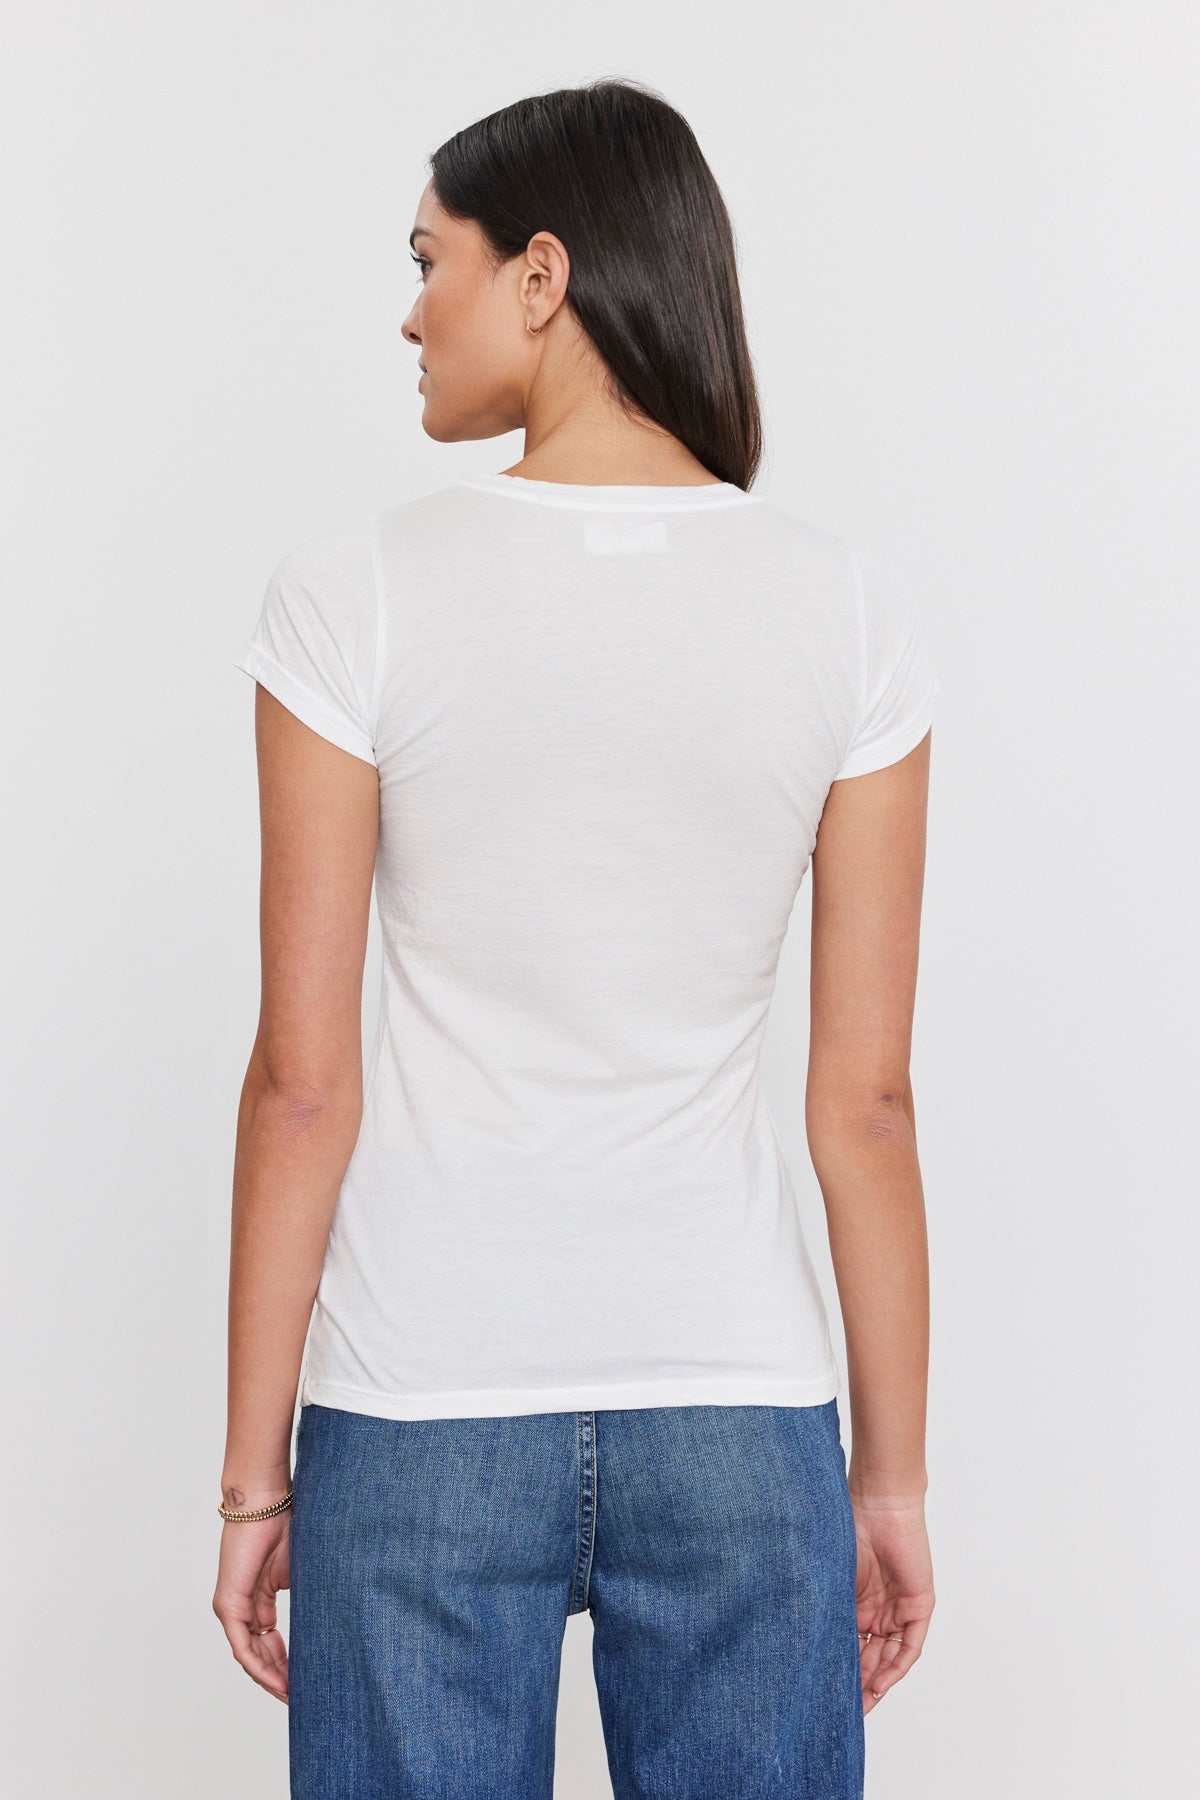 The back view of a woman wearing a Velvet by Graham & Spencer JEMMA GAUZY WHISPER FITTED CREW NECK TEE, jazzed up by the softest gauzy whisper cotton.-35586101346497